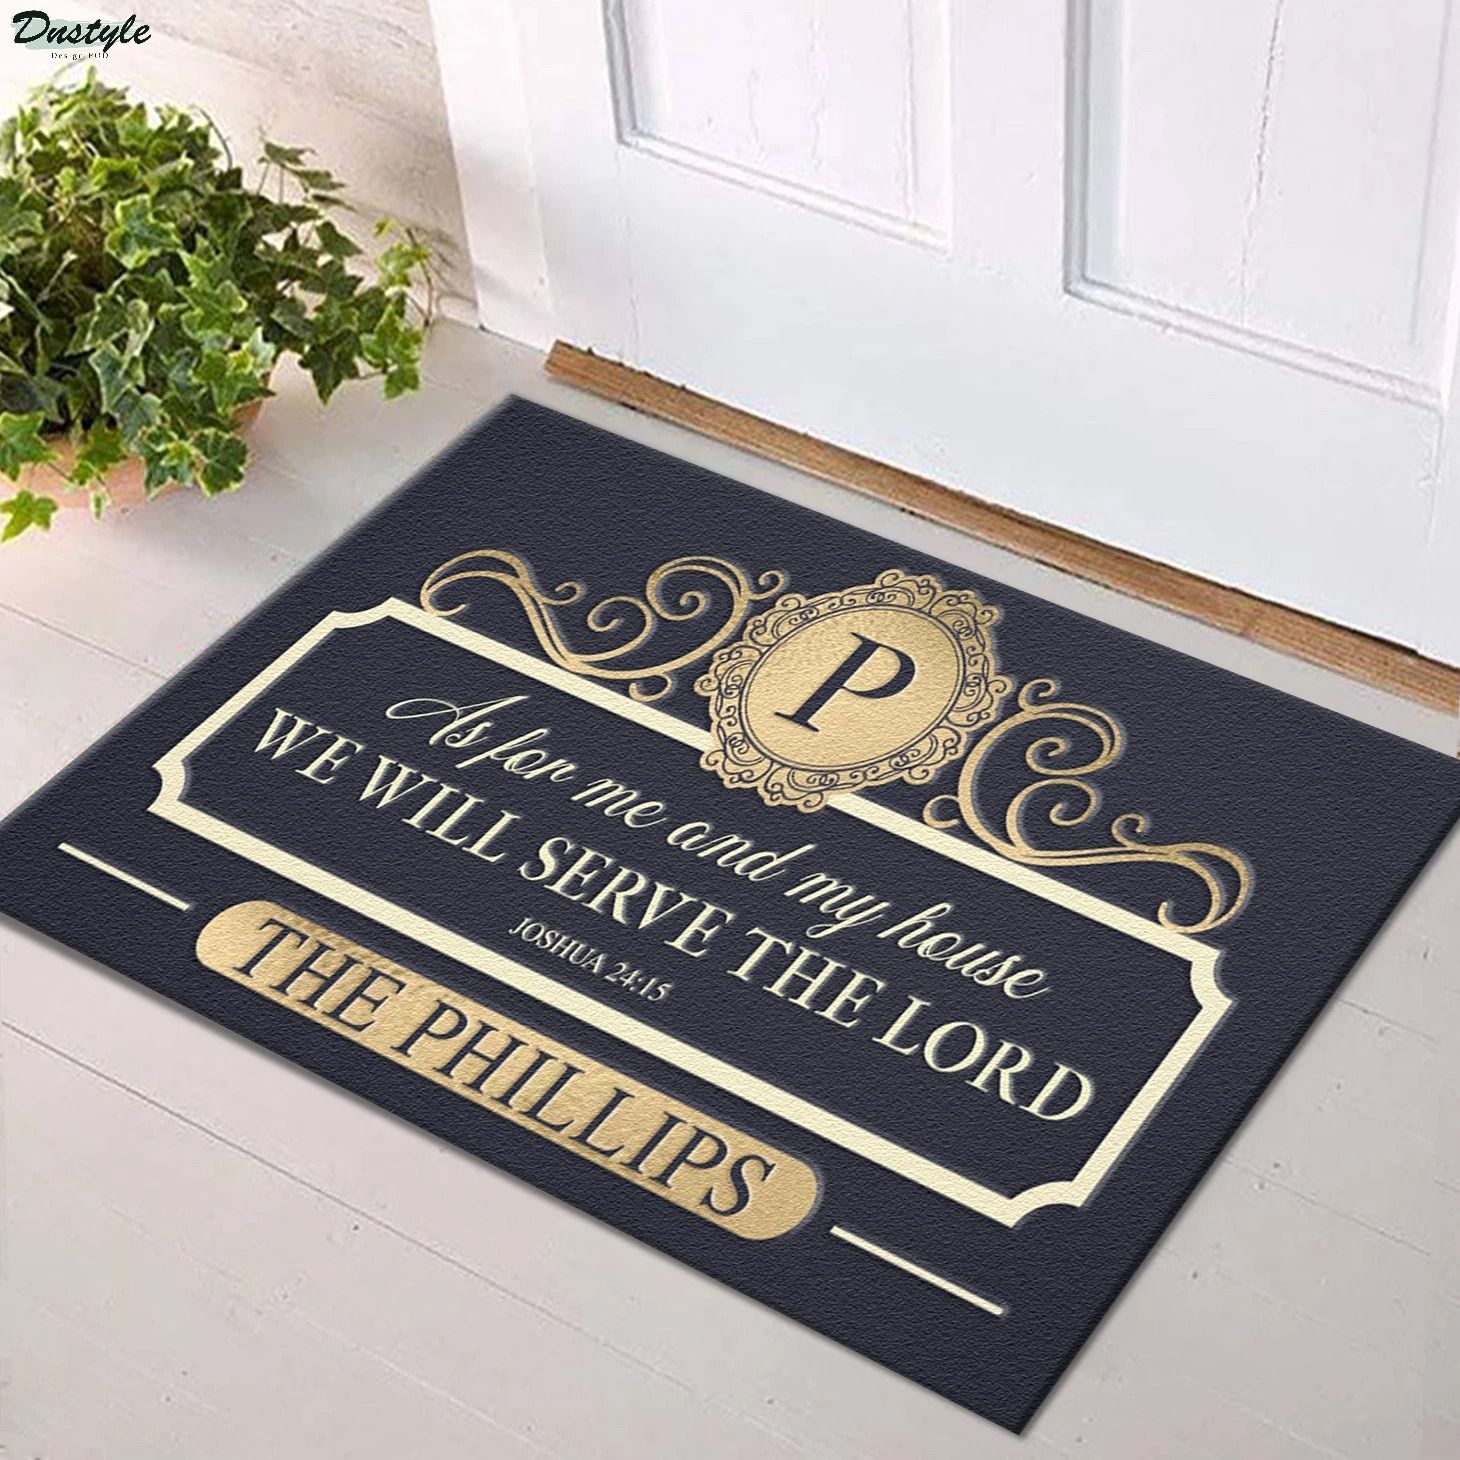 Personalized as for me and my house we will serve the lord joshua 24 15 doormat 2